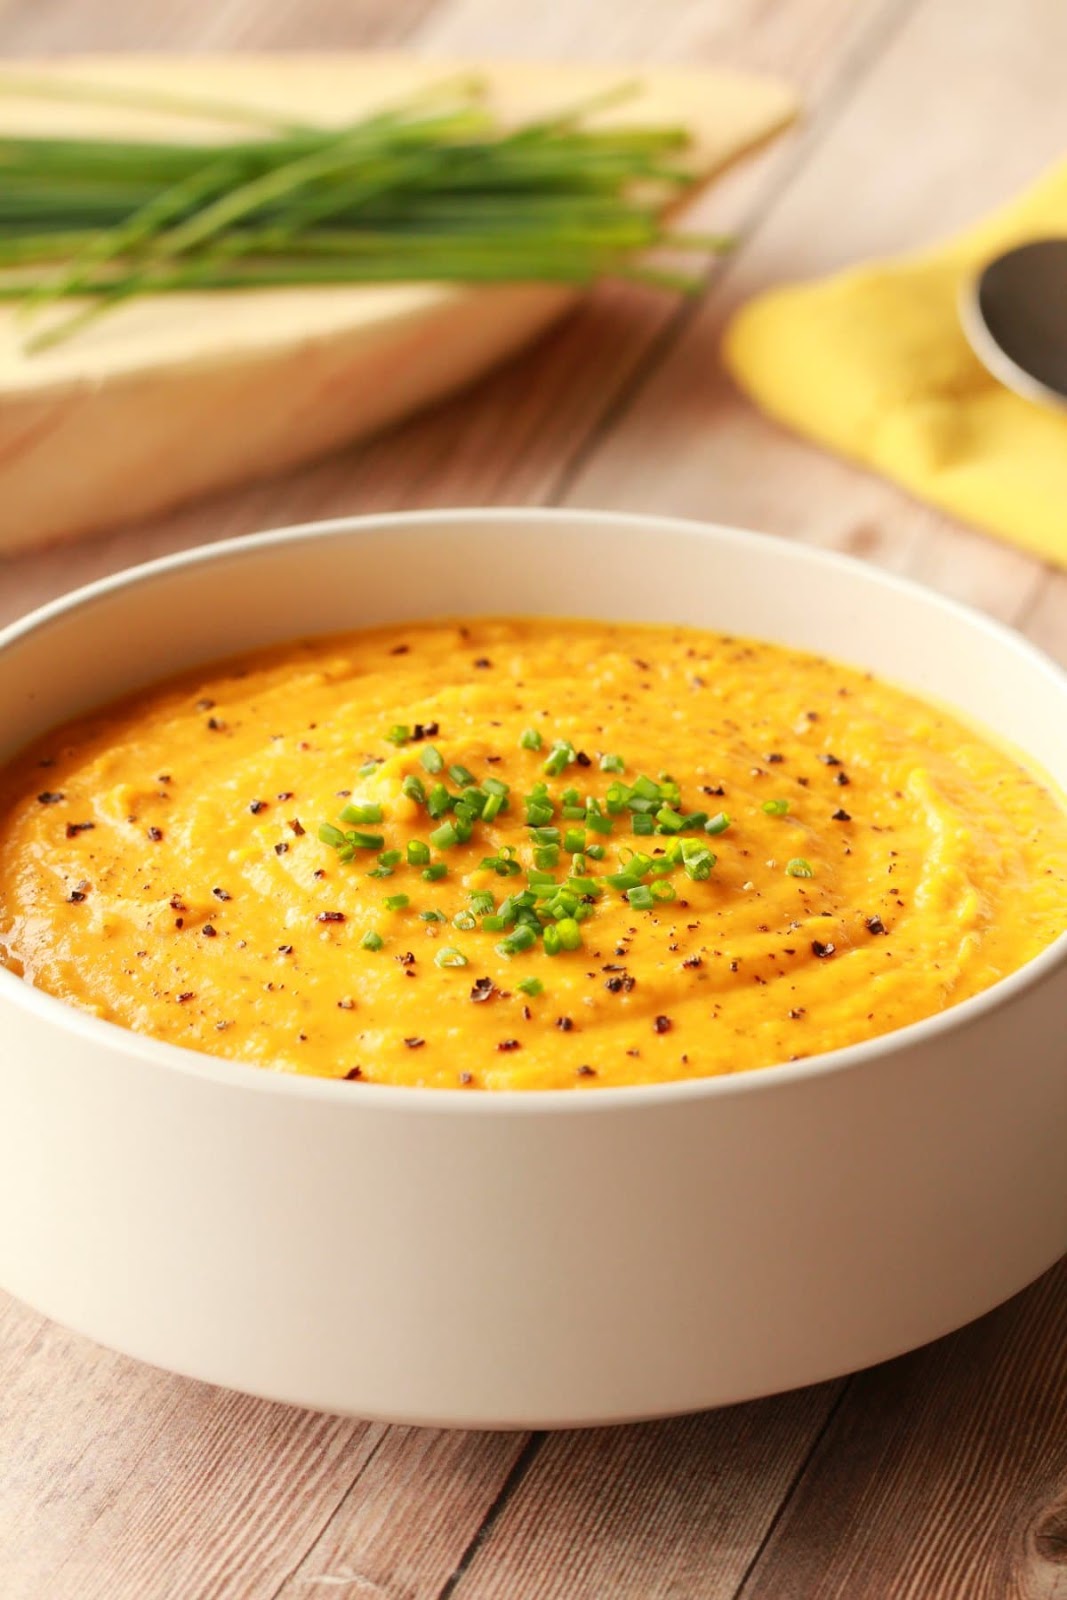 Get What To Garnish Butternut Squash Soup With Images ...